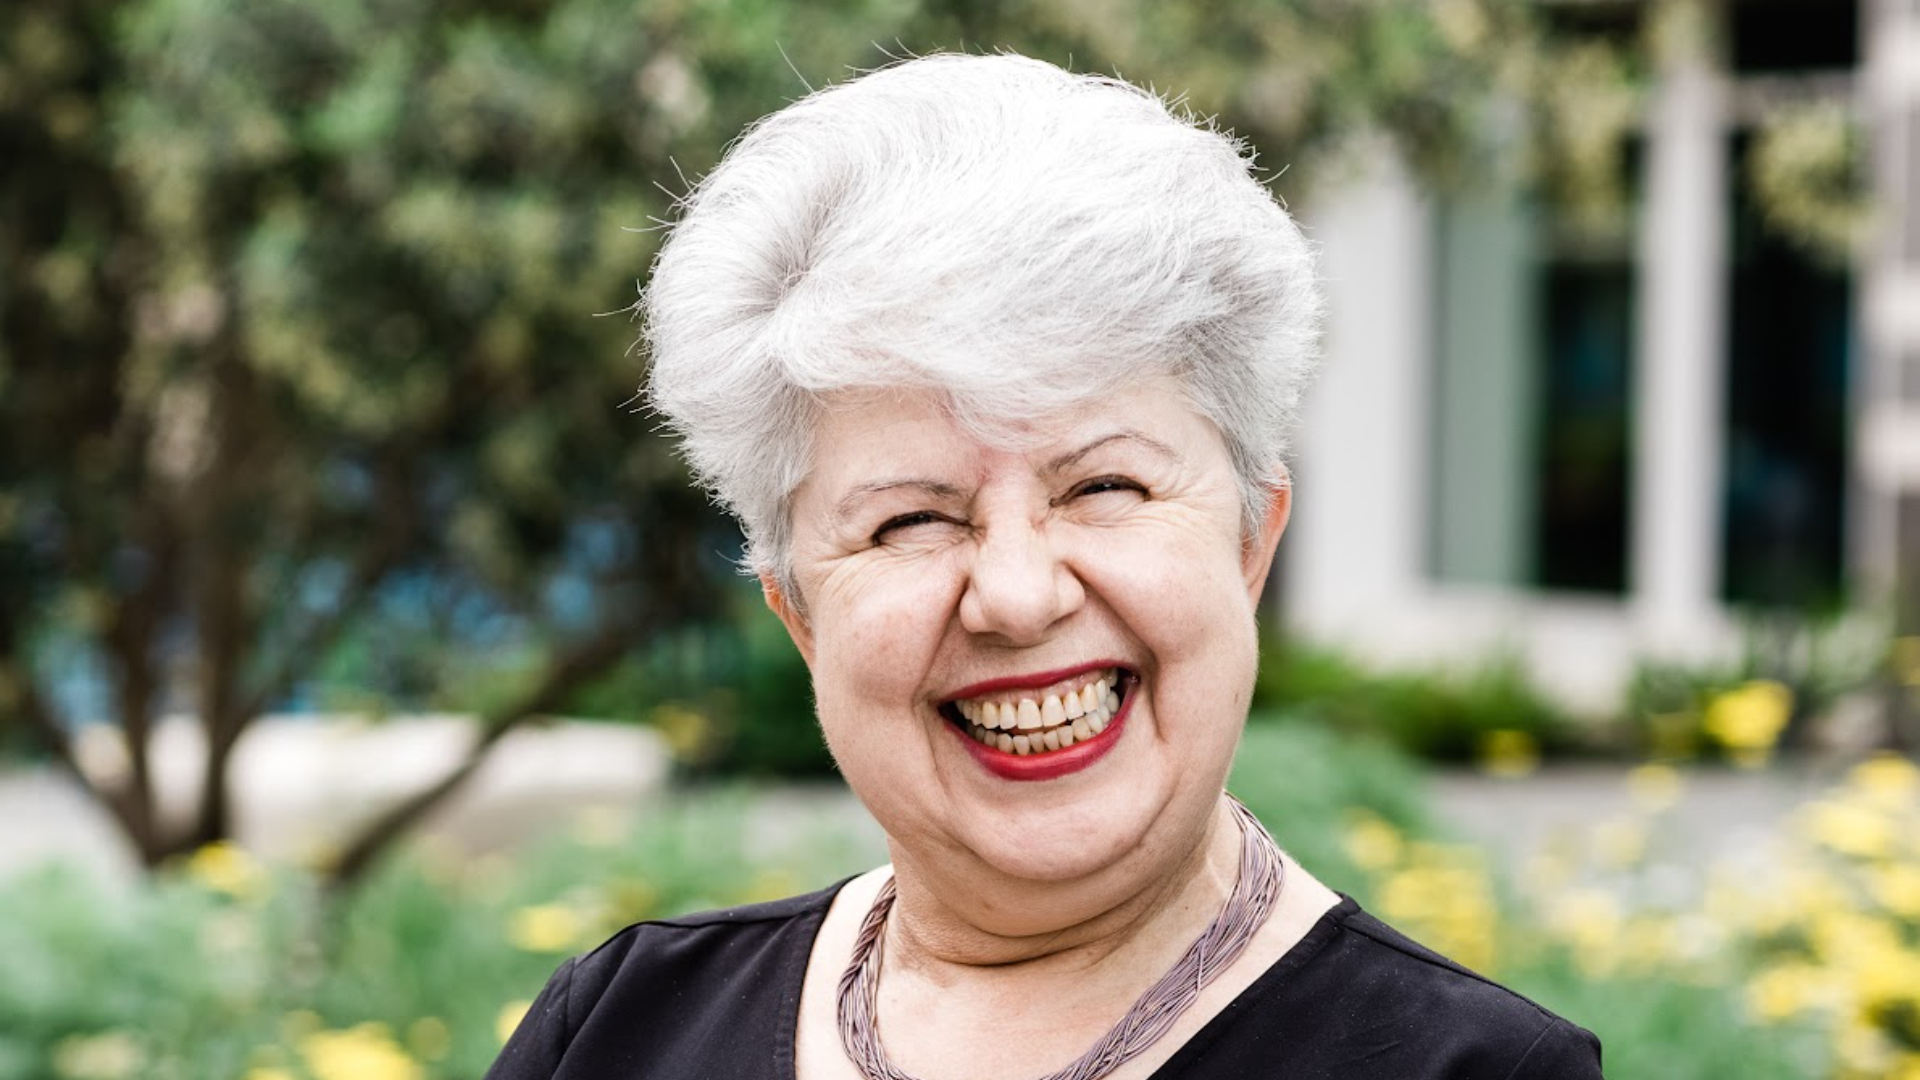 a woman with white hair and a smile on her face.